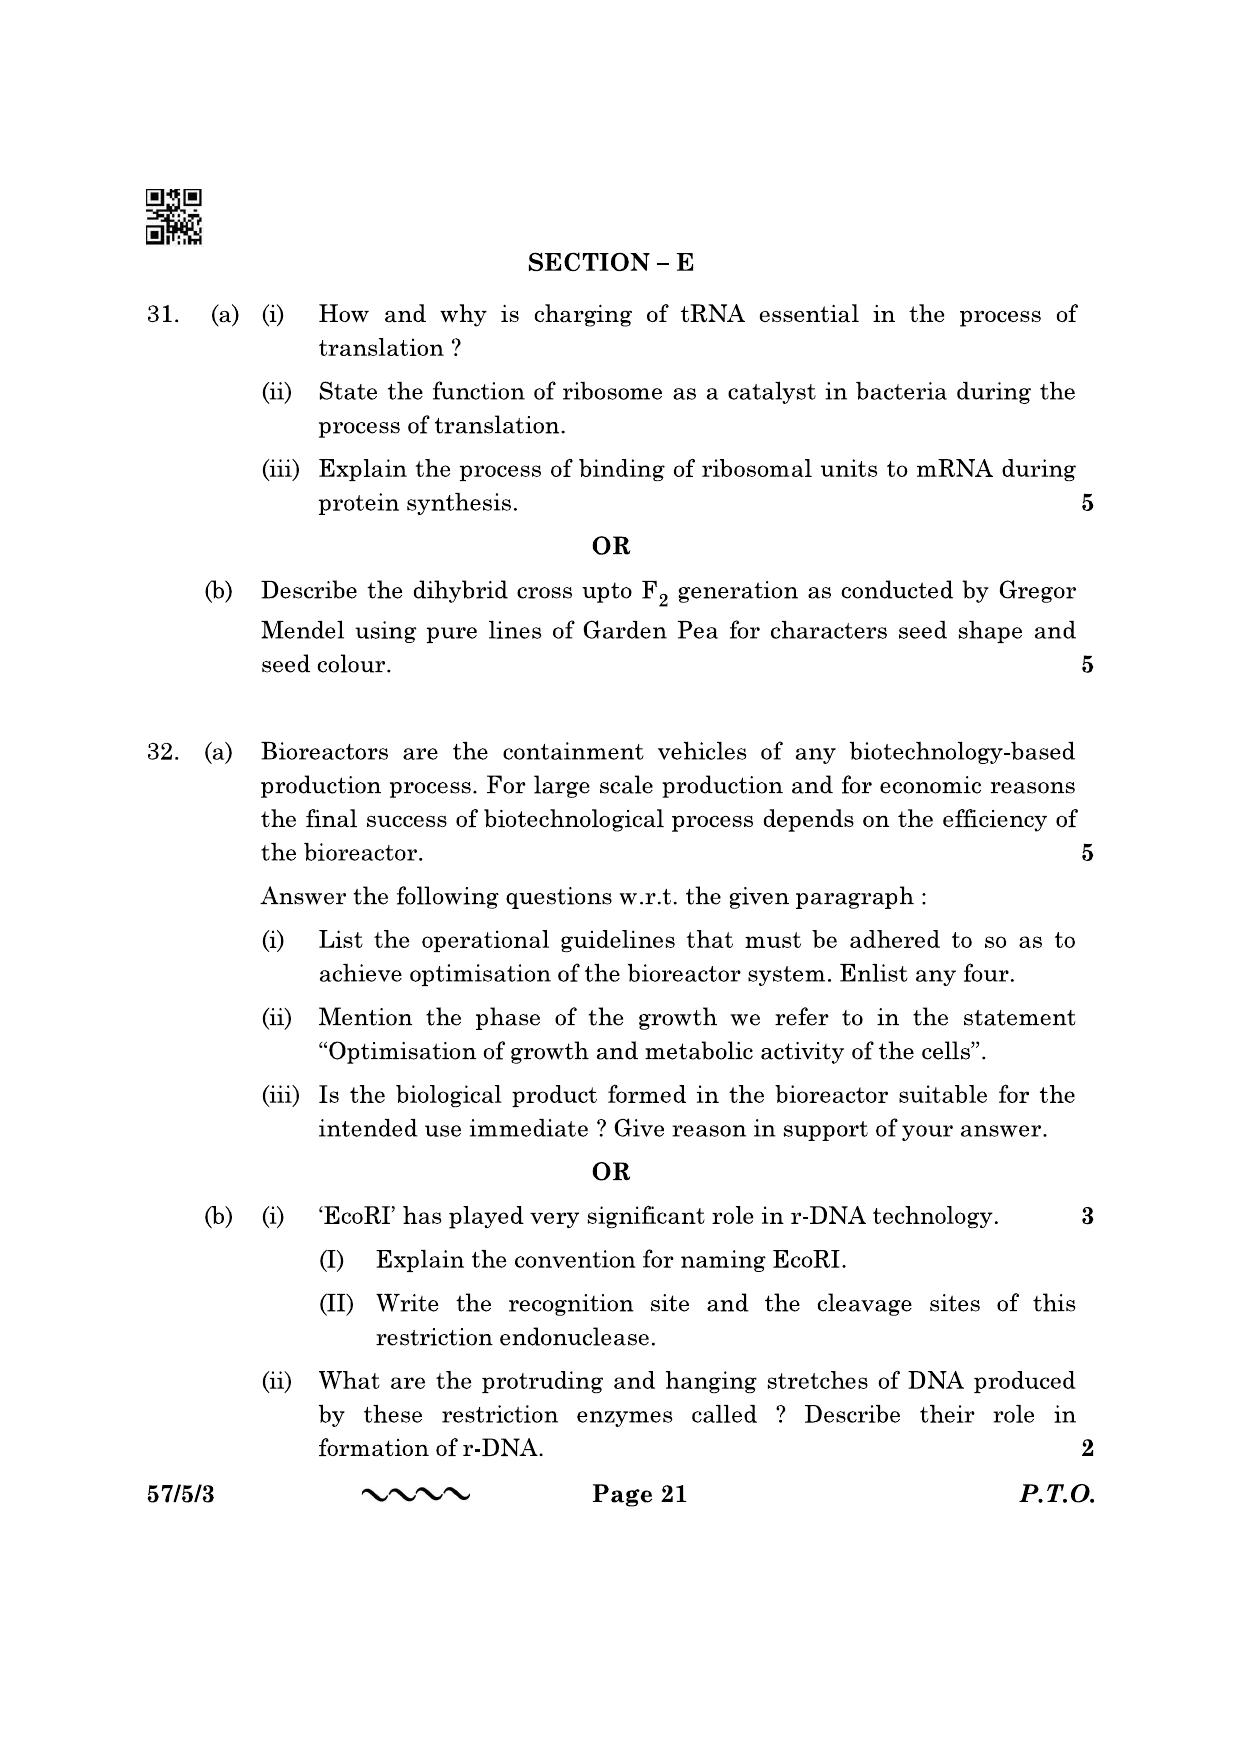 CBSE Class 12 57-5-3 Biology 2023 Question Paper - Page 21